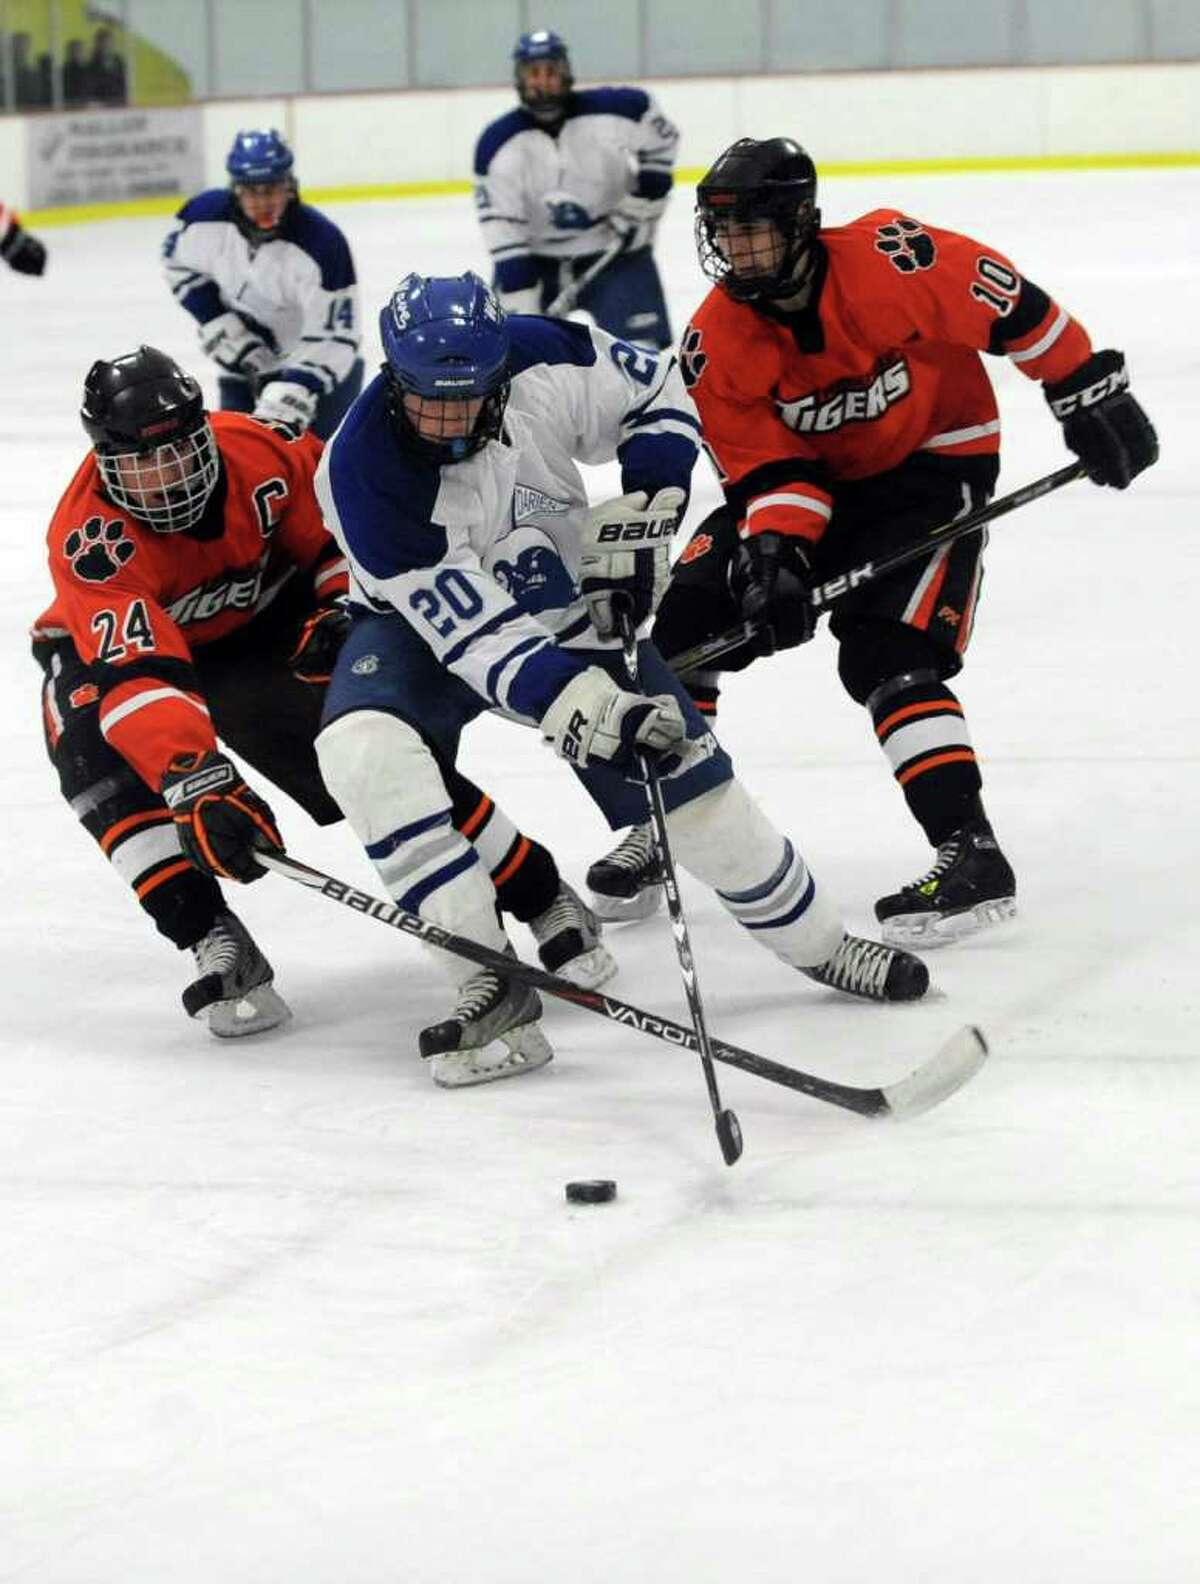 Darien's Trent Bergin, center, controls the puck as he is surrounded by Ridgefield's Brendan Bossidy, left, and Henry Gough, right, during Saturday's FCIAC Teir I Boys Hockey Championship at Terry Conners Rink in Stamford on March 3, 2012.